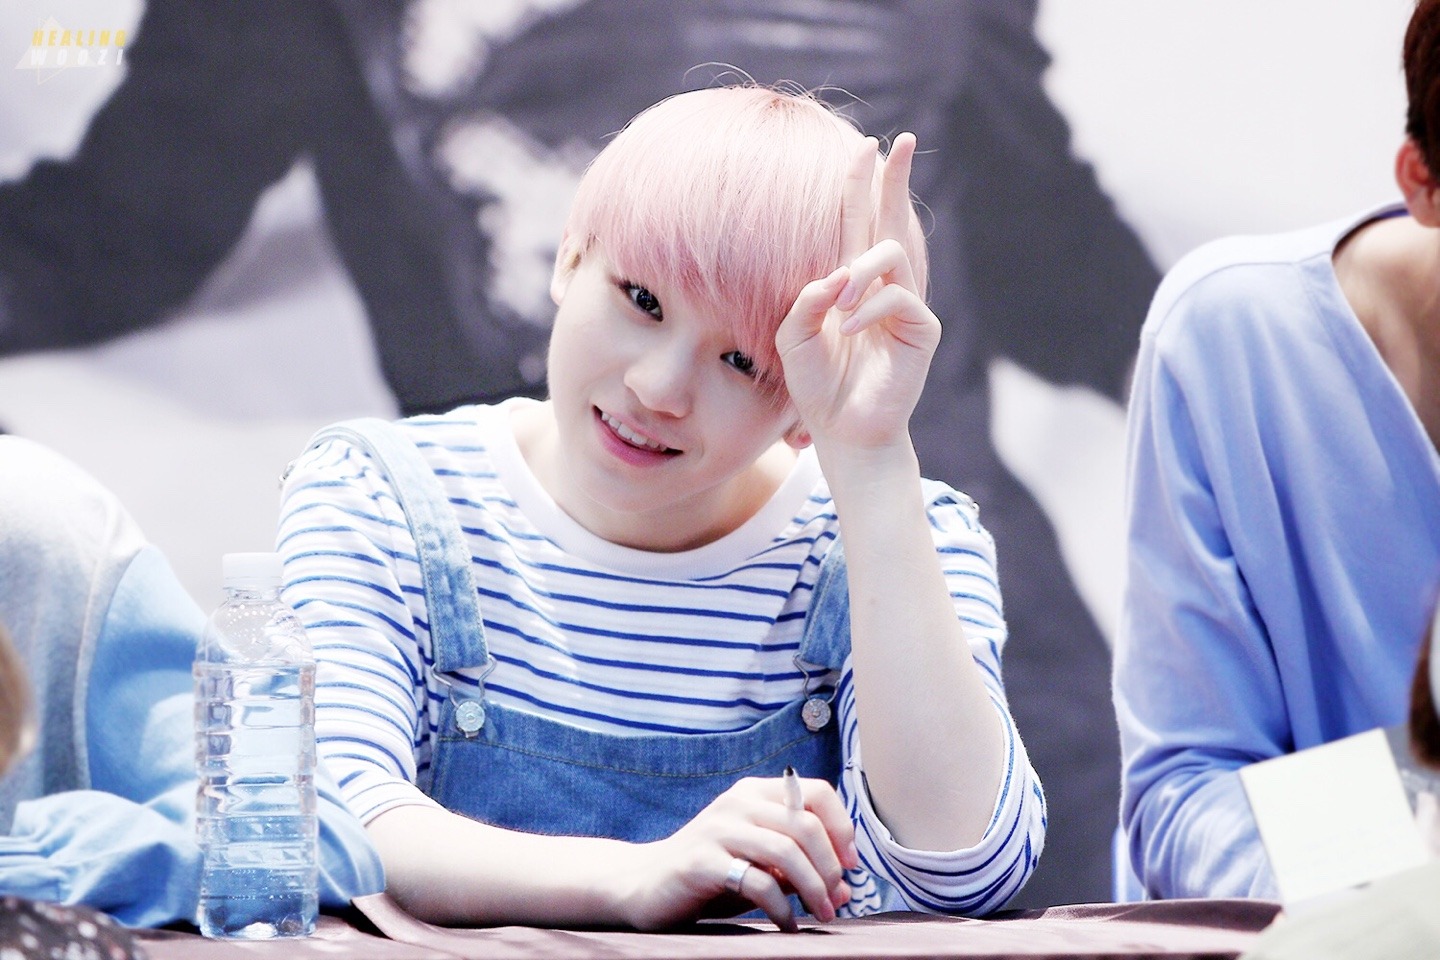 7 Best Pastel Hair Colors From SEVENTEEN Woozi - Koreaboo